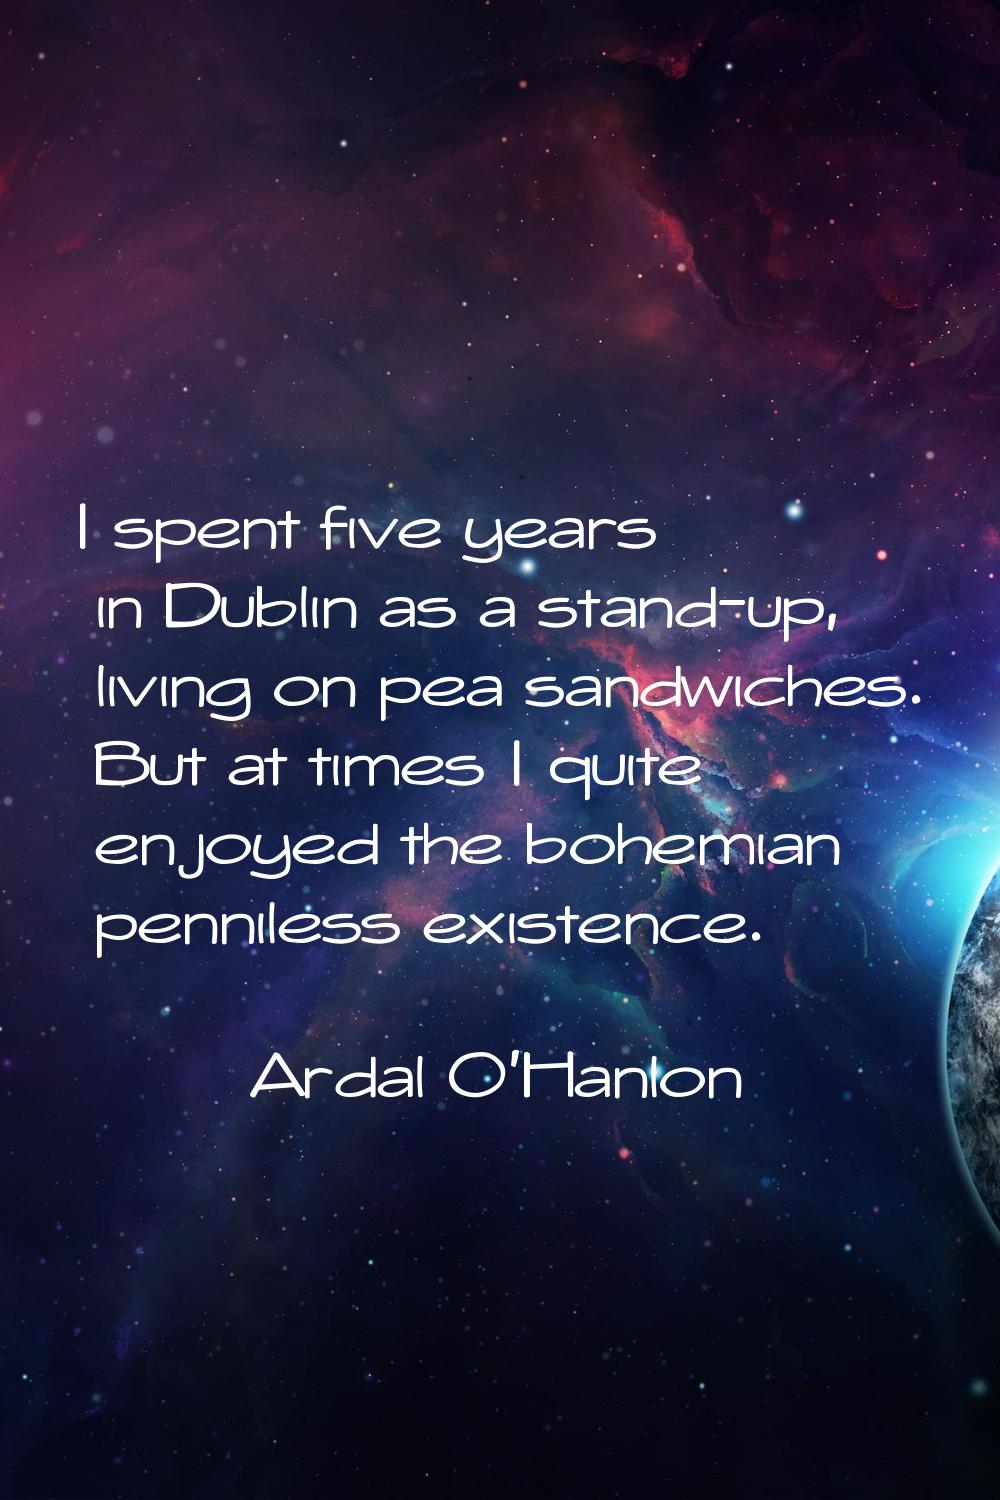 I spent five years in Dublin as a stand-up, living on pea sandwiches. But at times I quite enjoyed 